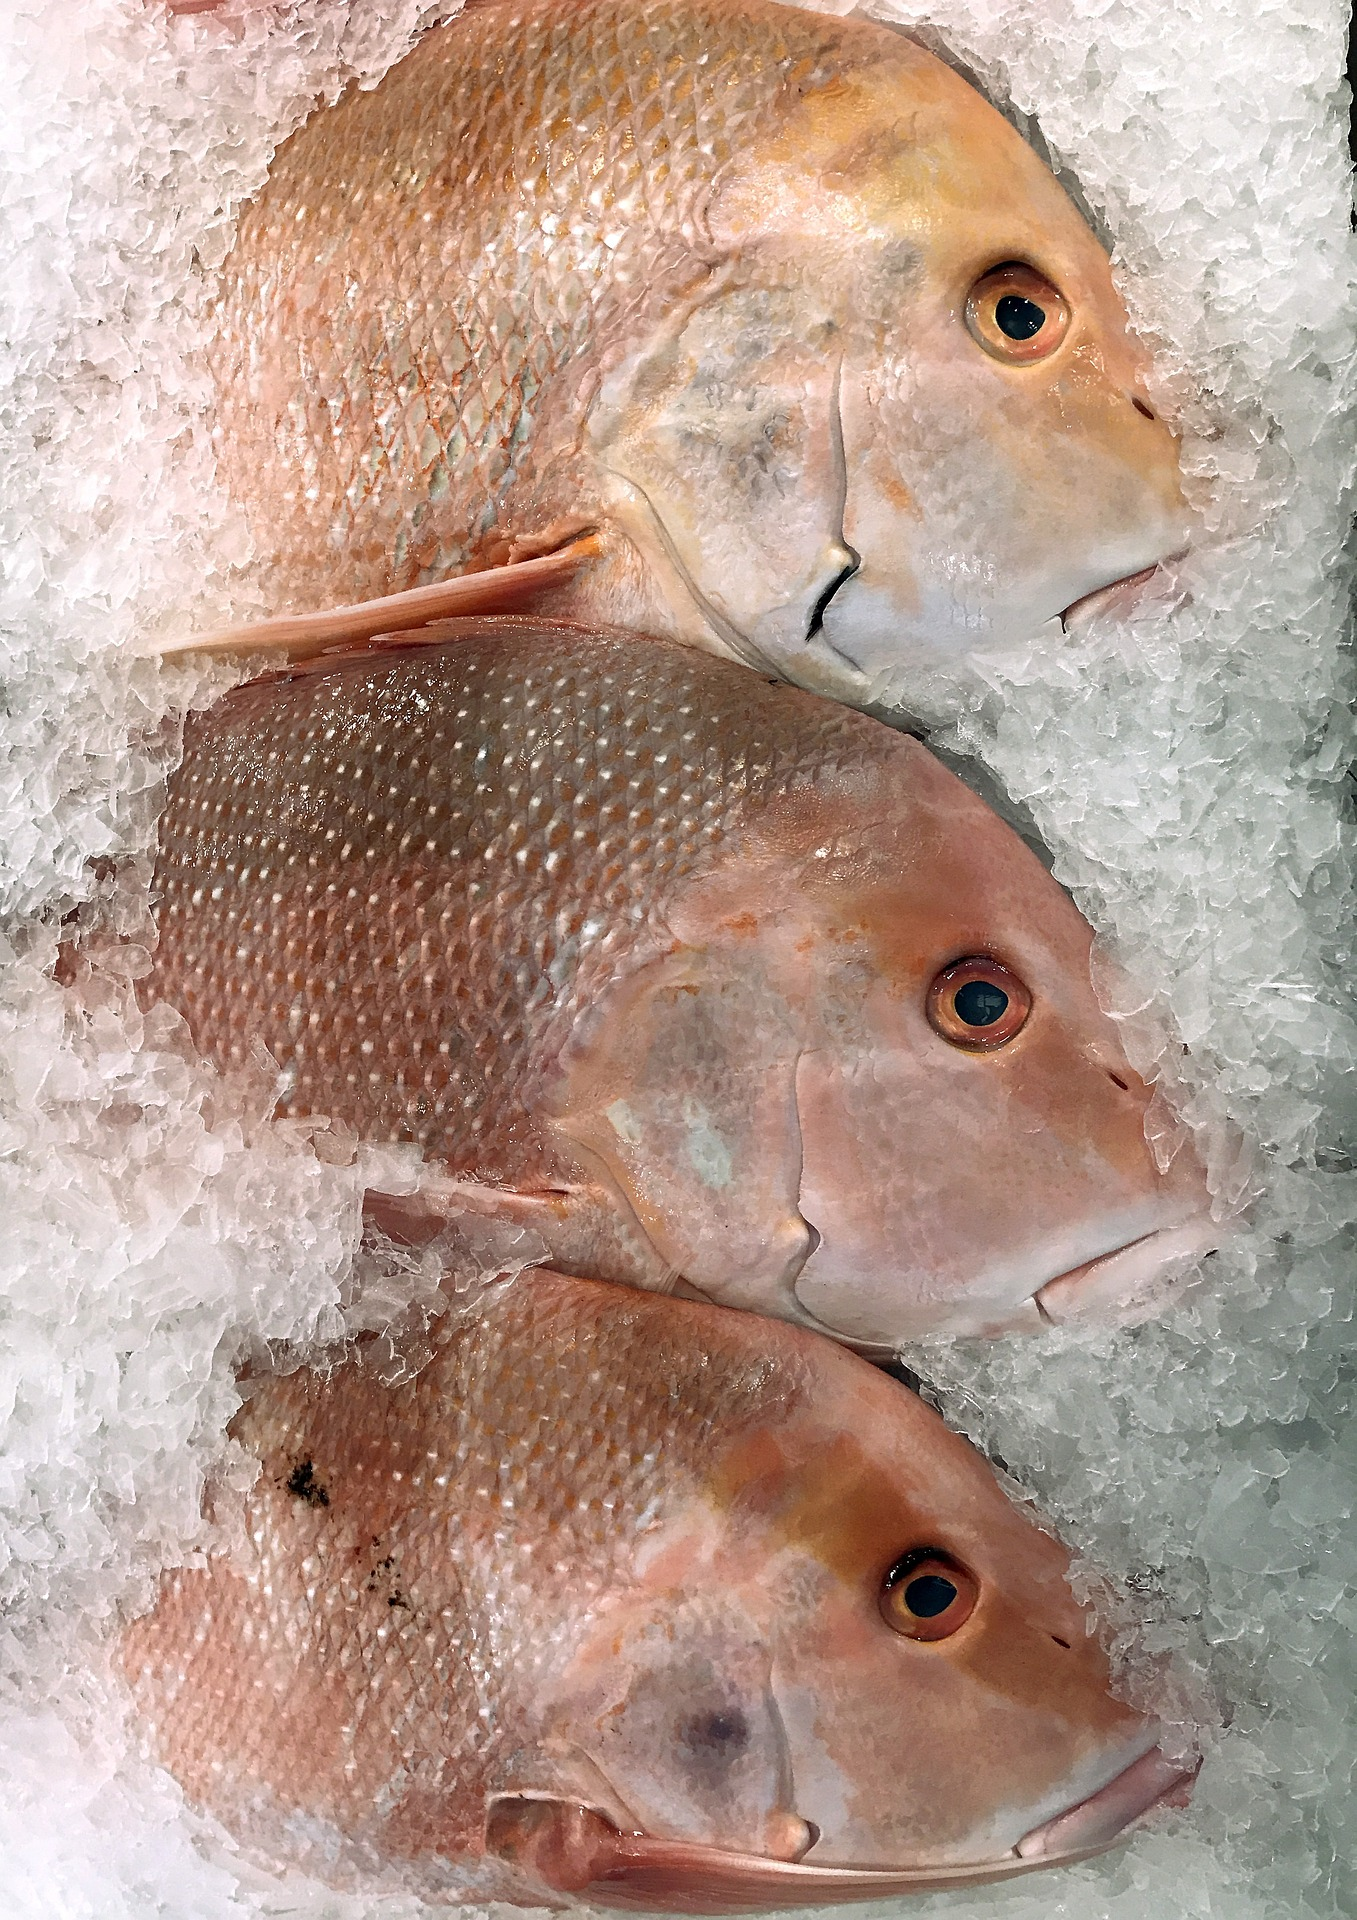 The fresh fish are laid on ice to preserve its freshness and to prepare it as food. They were caught with bait.